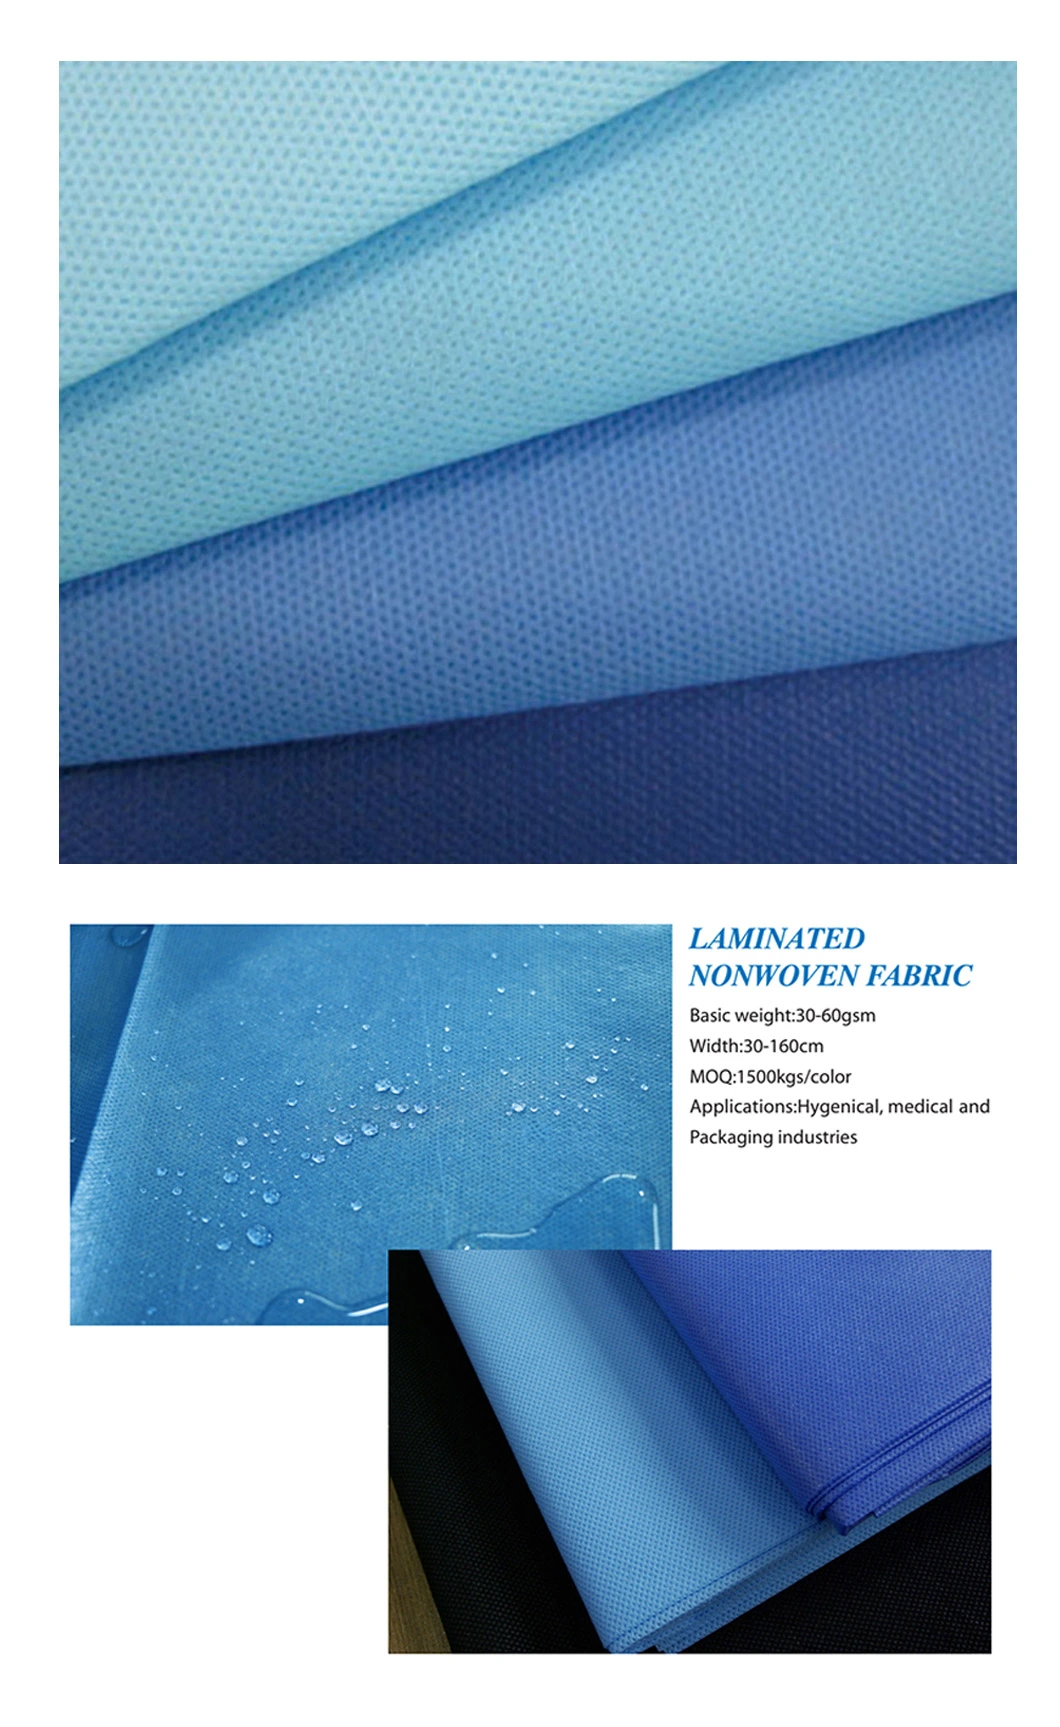 Hot Sale Laminated Medical Non Woven Fabric for Surgical Drapes